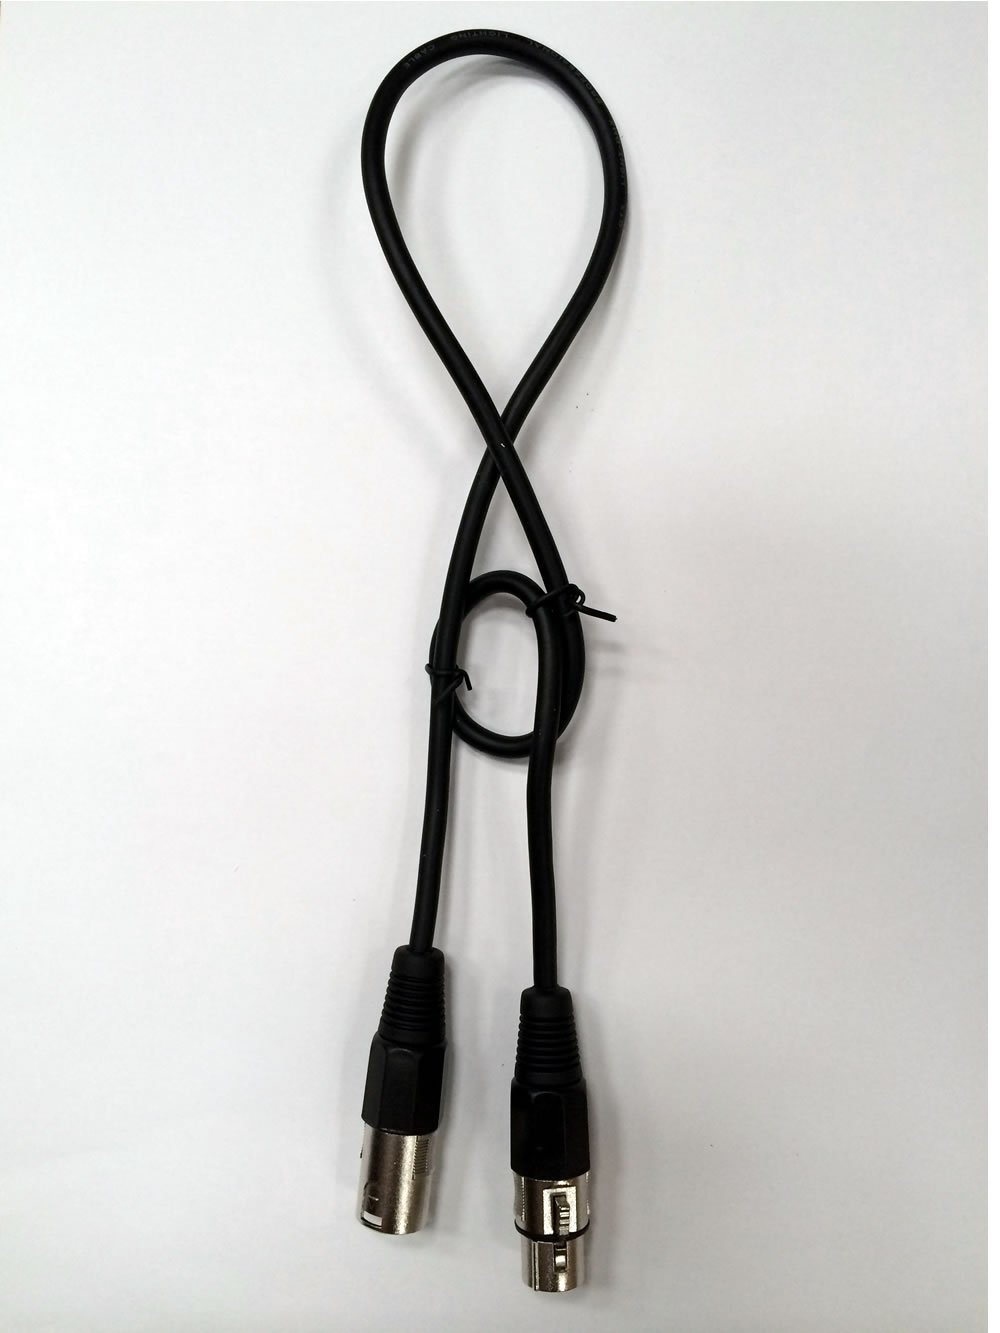 High Quality DMX Cable 0.75m